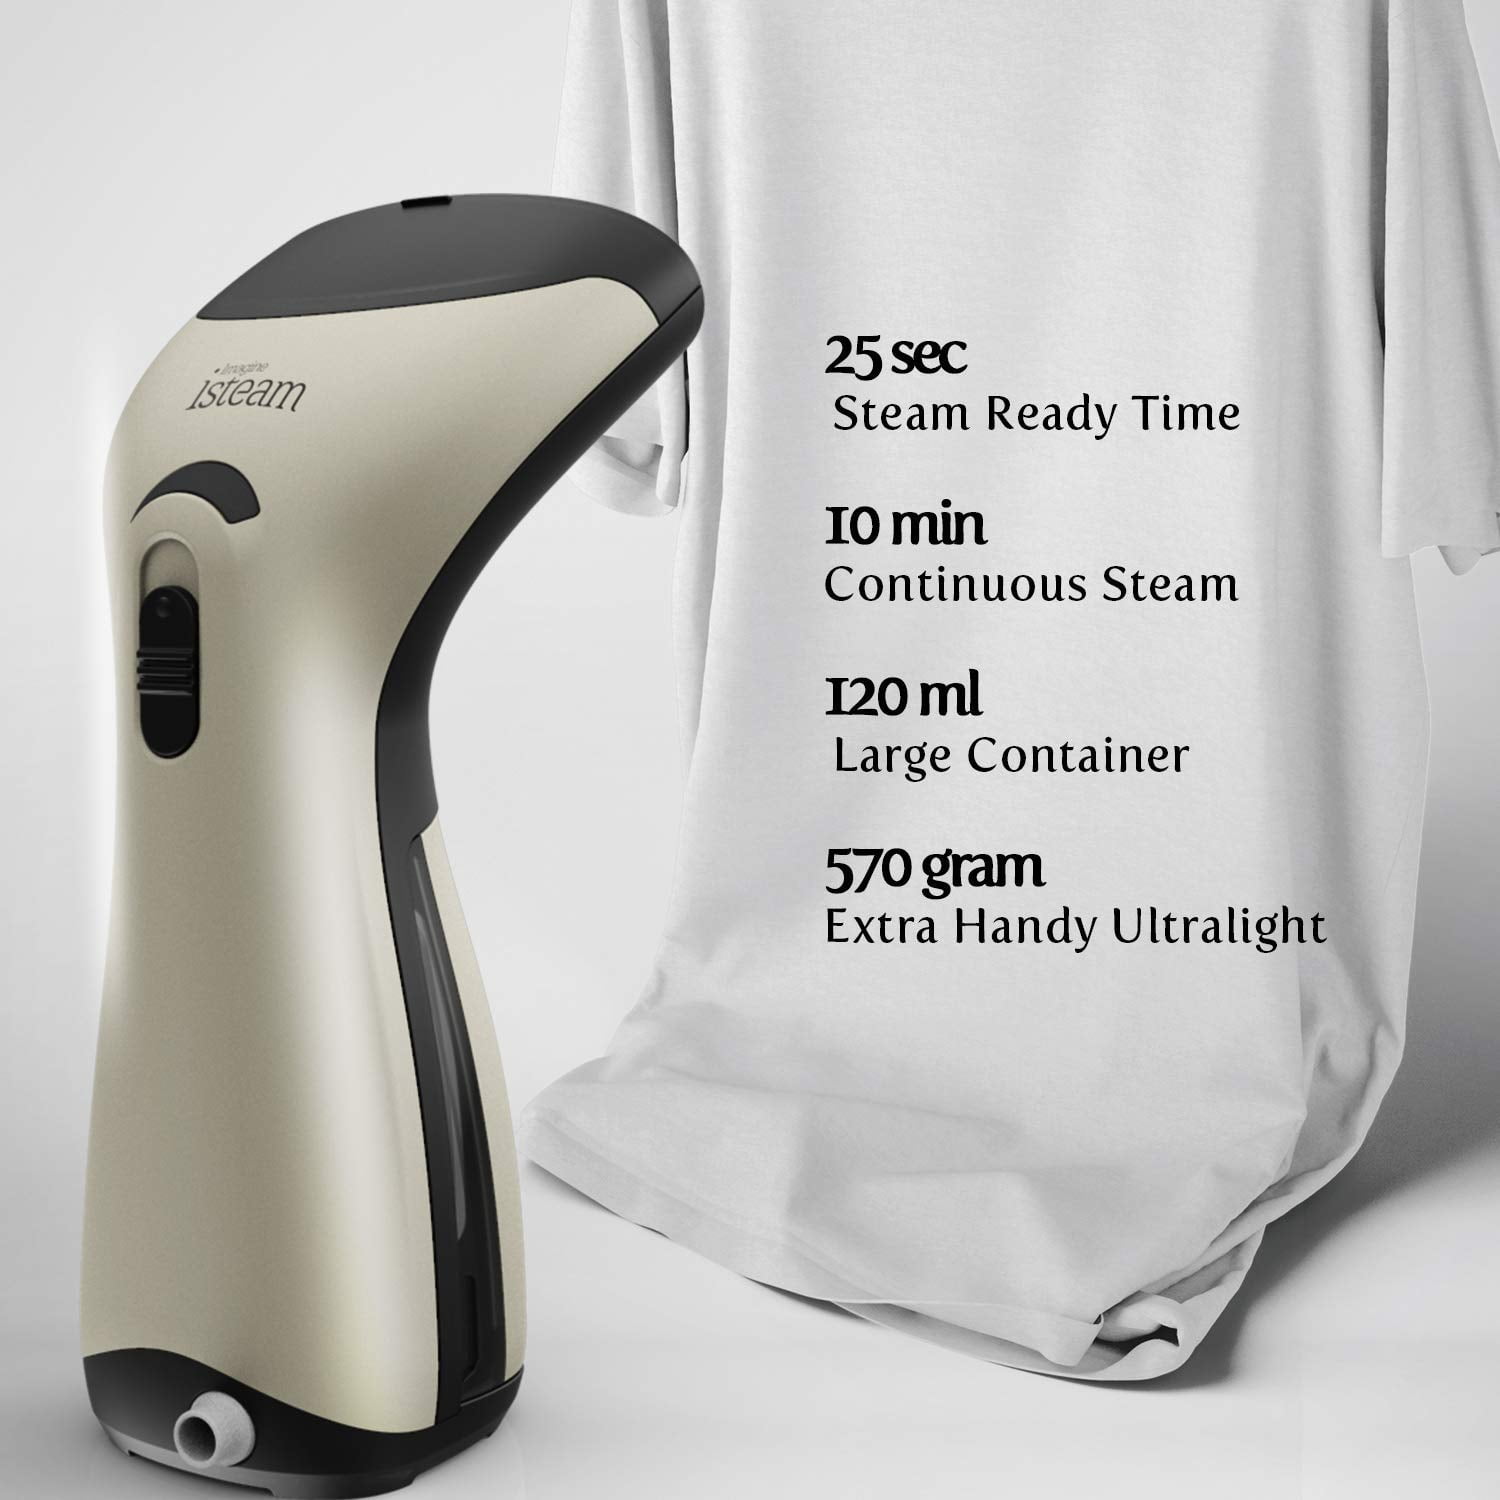 iSteam Luxury Edition Steamer New Technology 7-in-1 Powerful